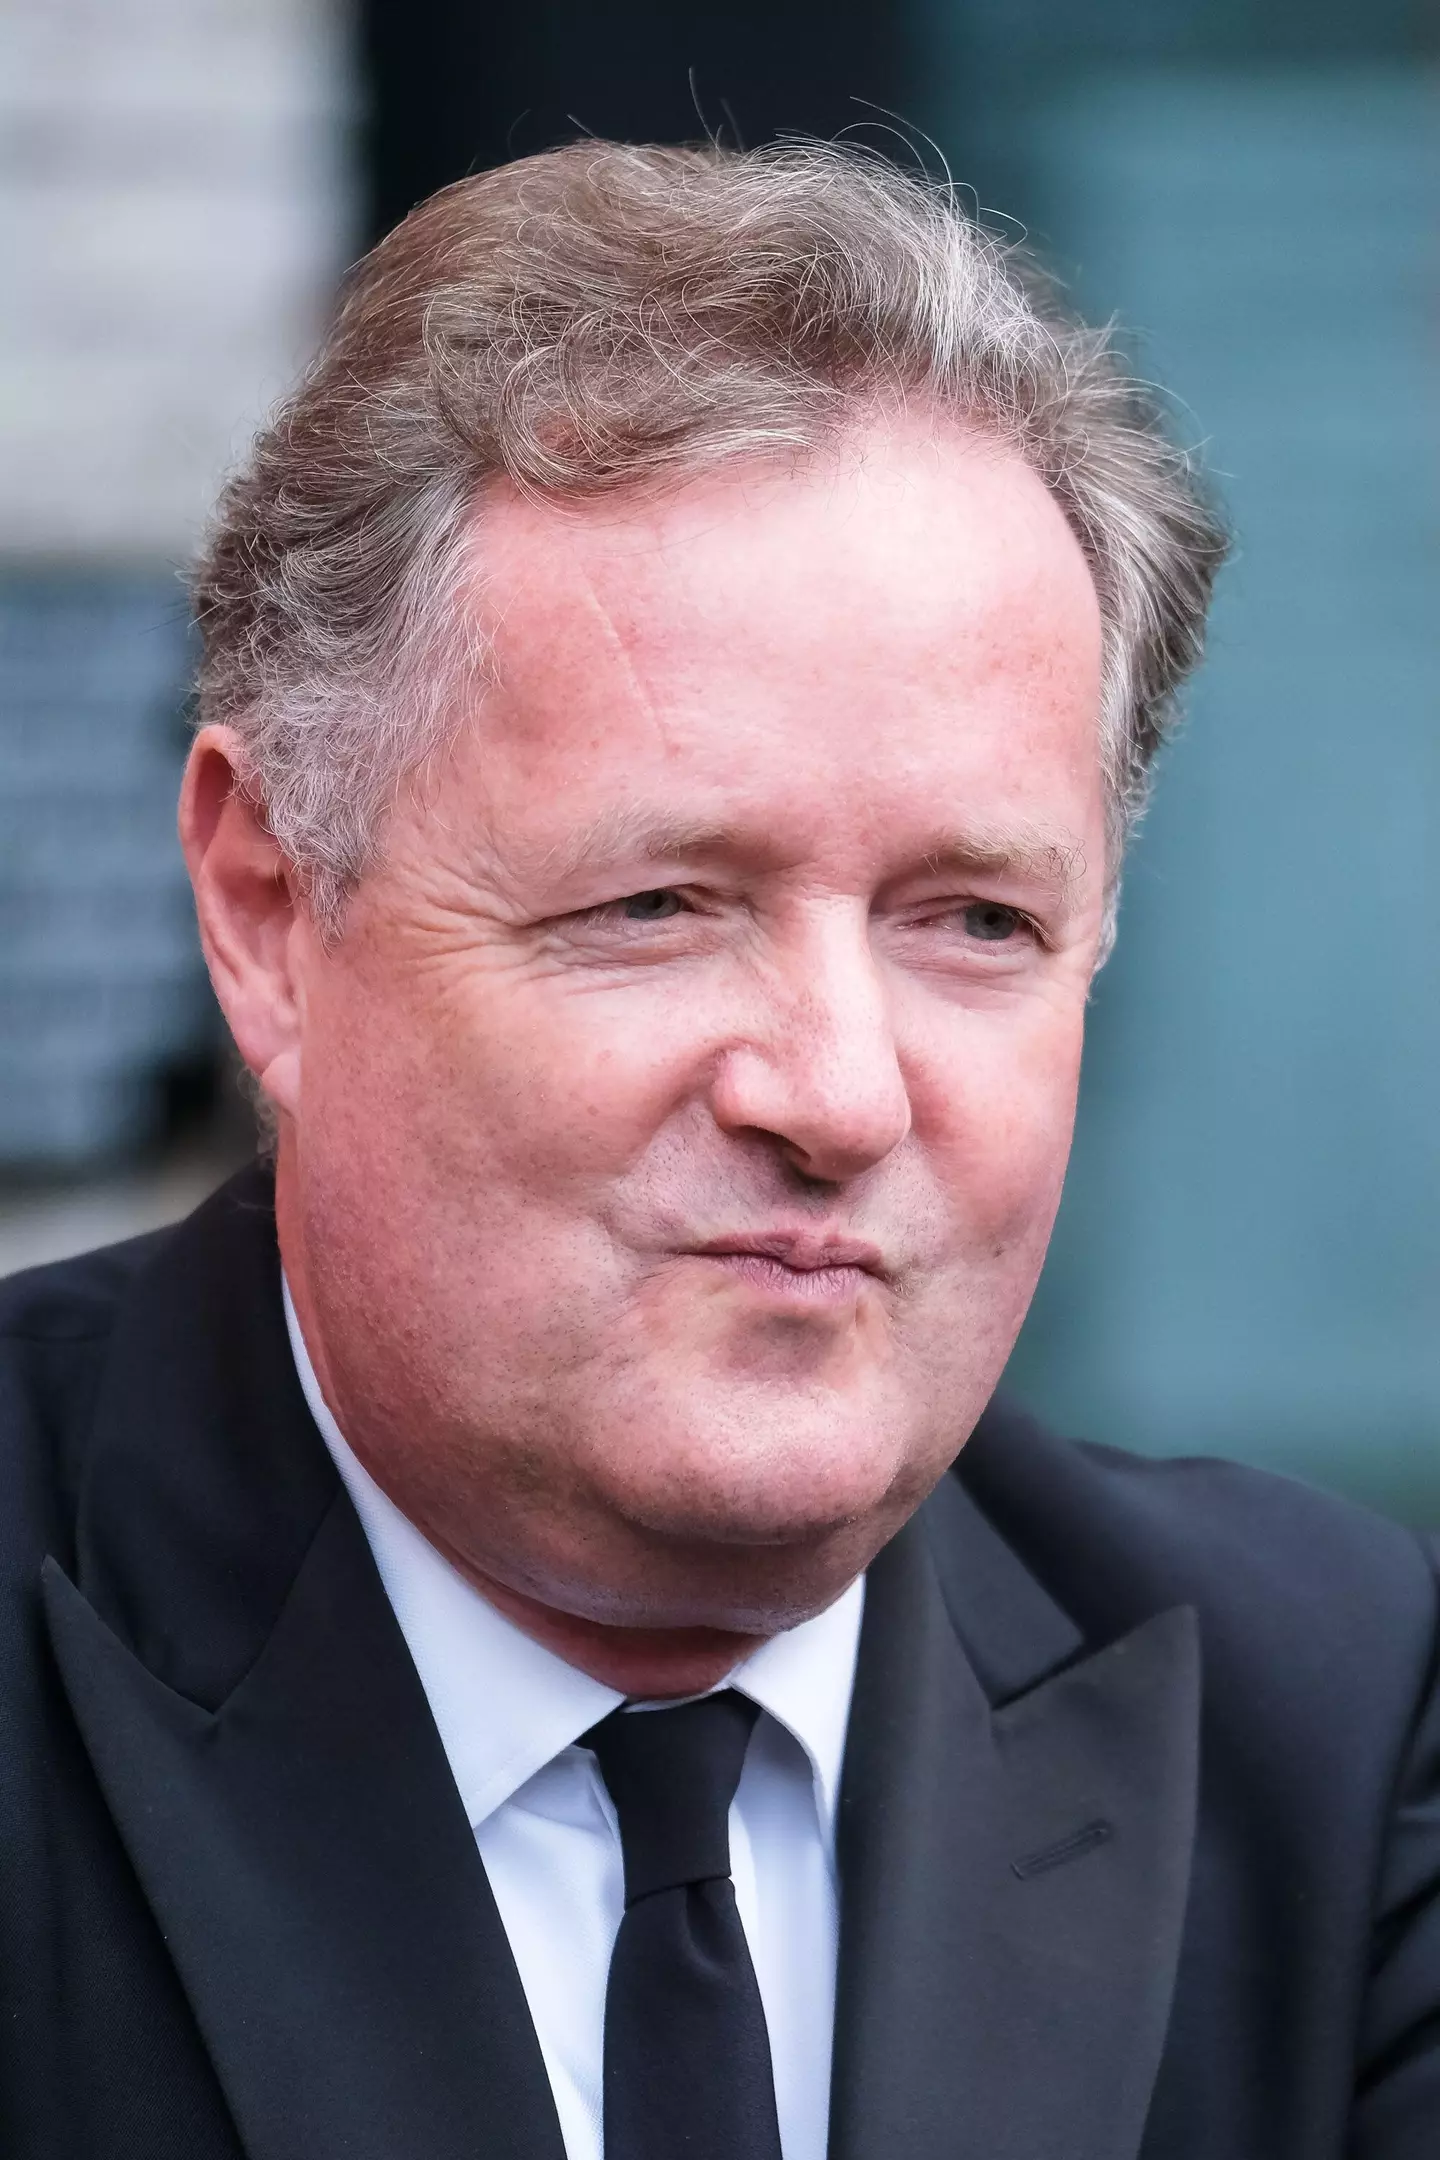 Piers Morgan has a long past of attacking Meghan Markle.